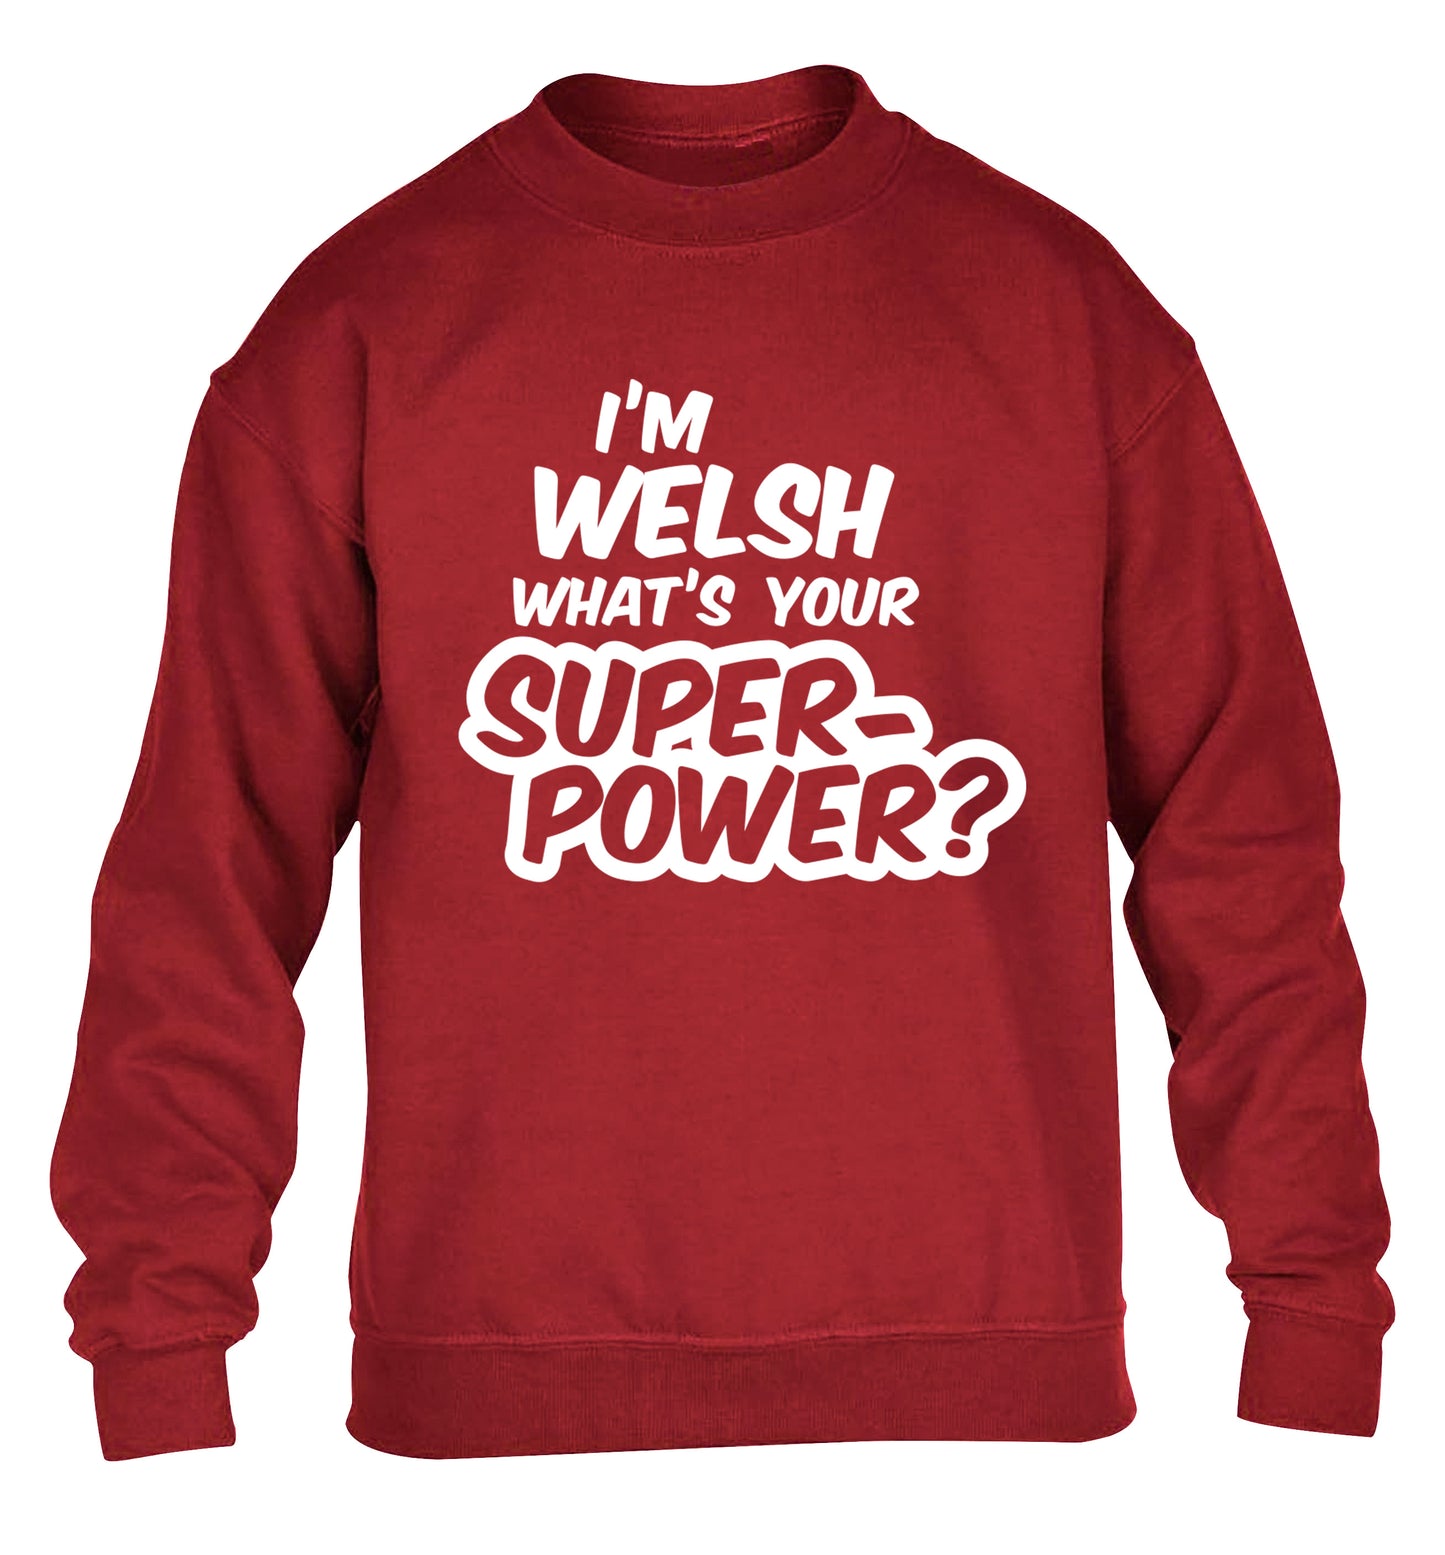 I'm Welsh what's your superpower? children's grey sweater 12-13 Years